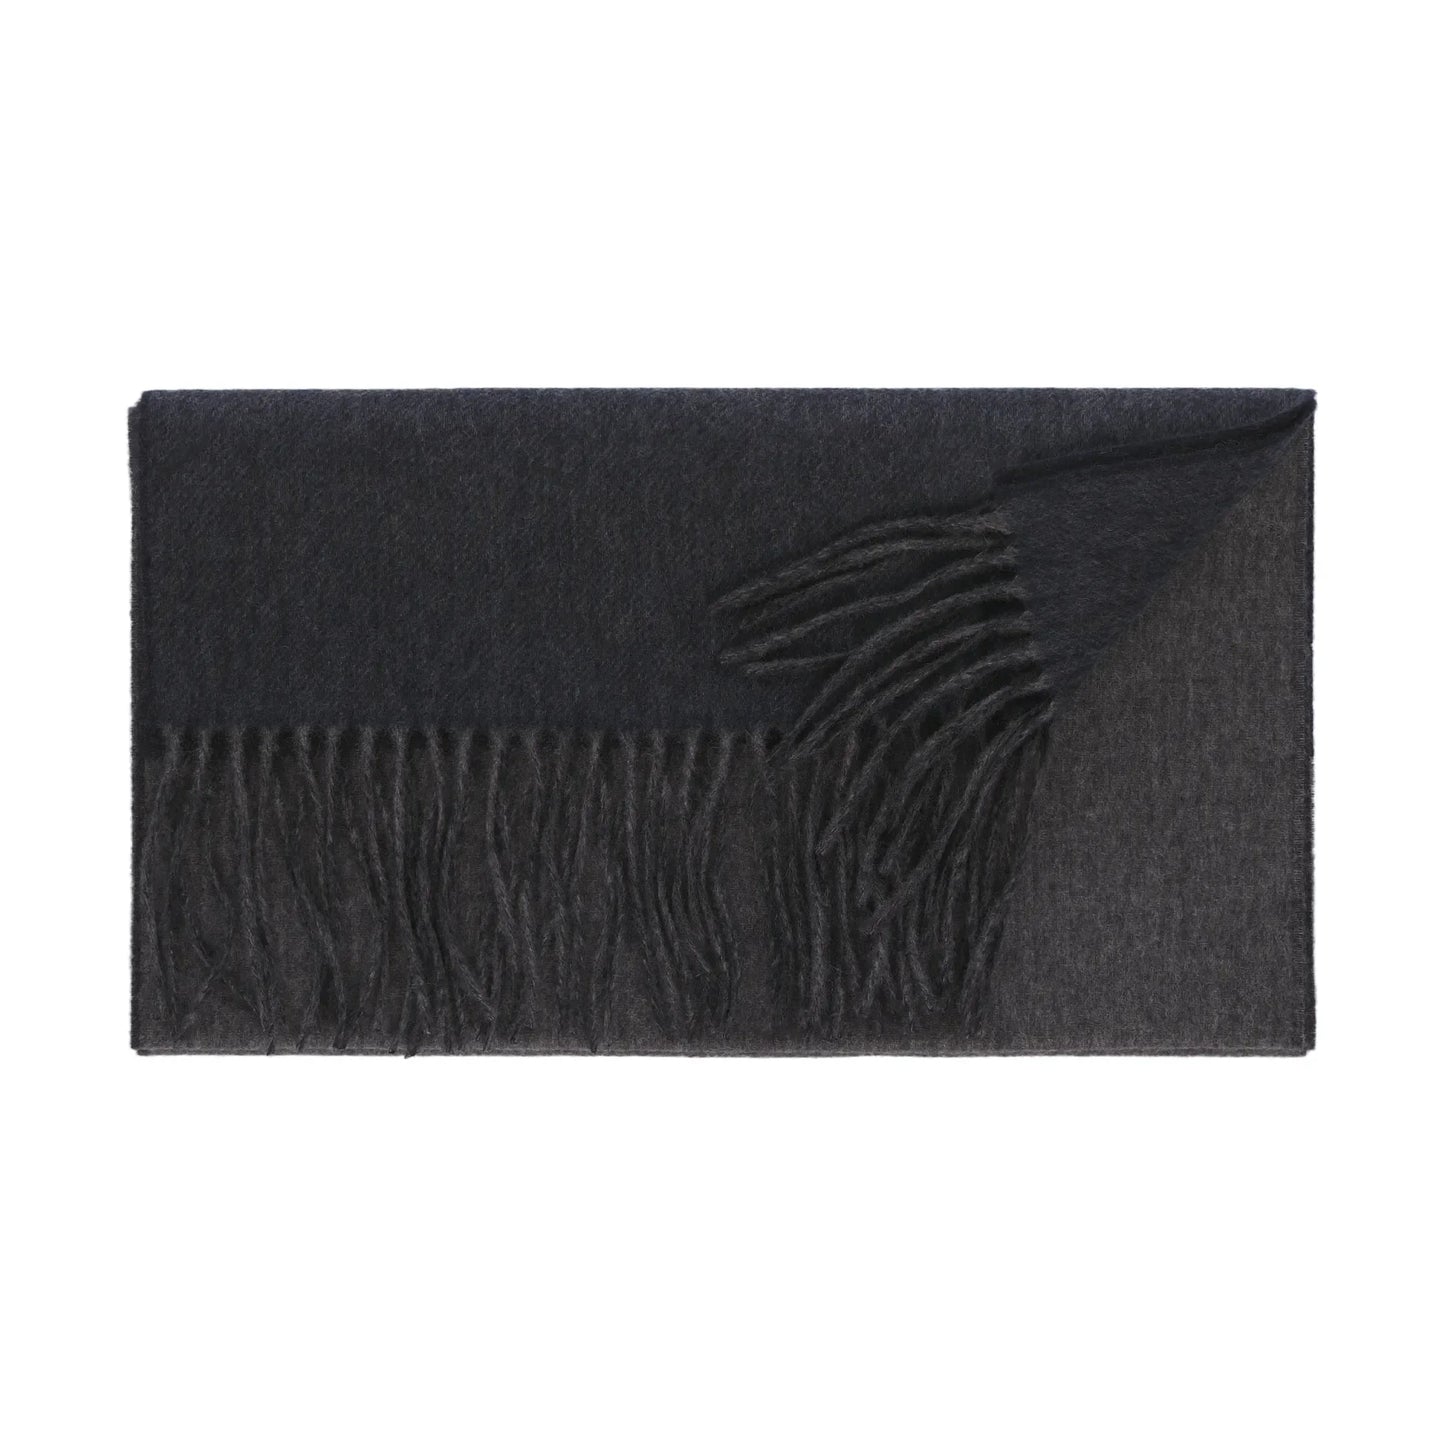 Fringed Cashmere Scarf in Grey